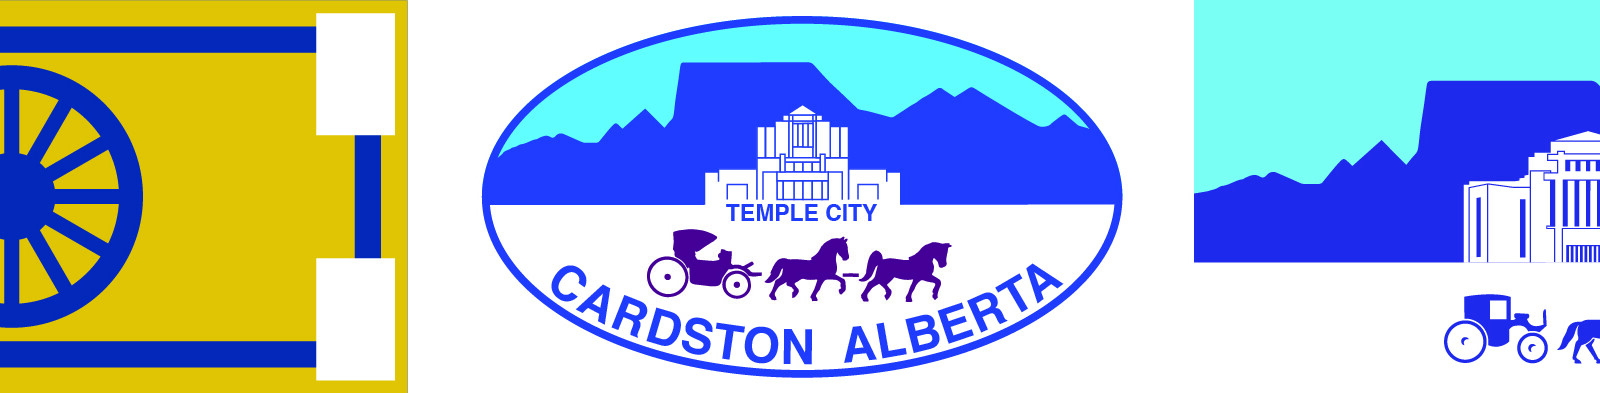 Flag of Cardston